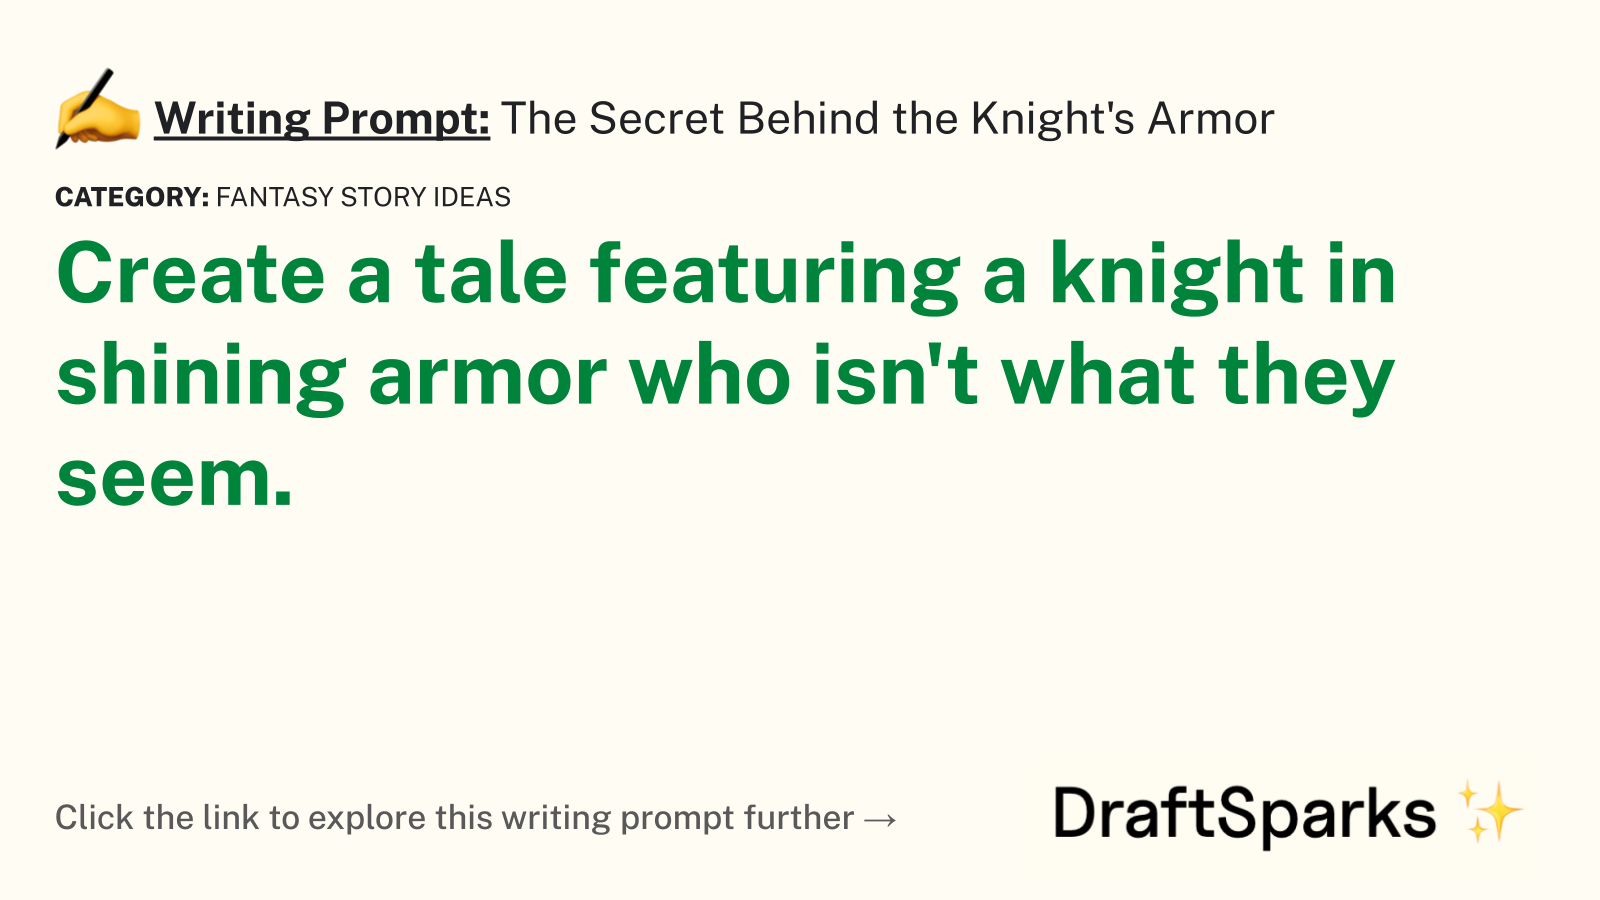 The Secret Behind the Knight’s Armor